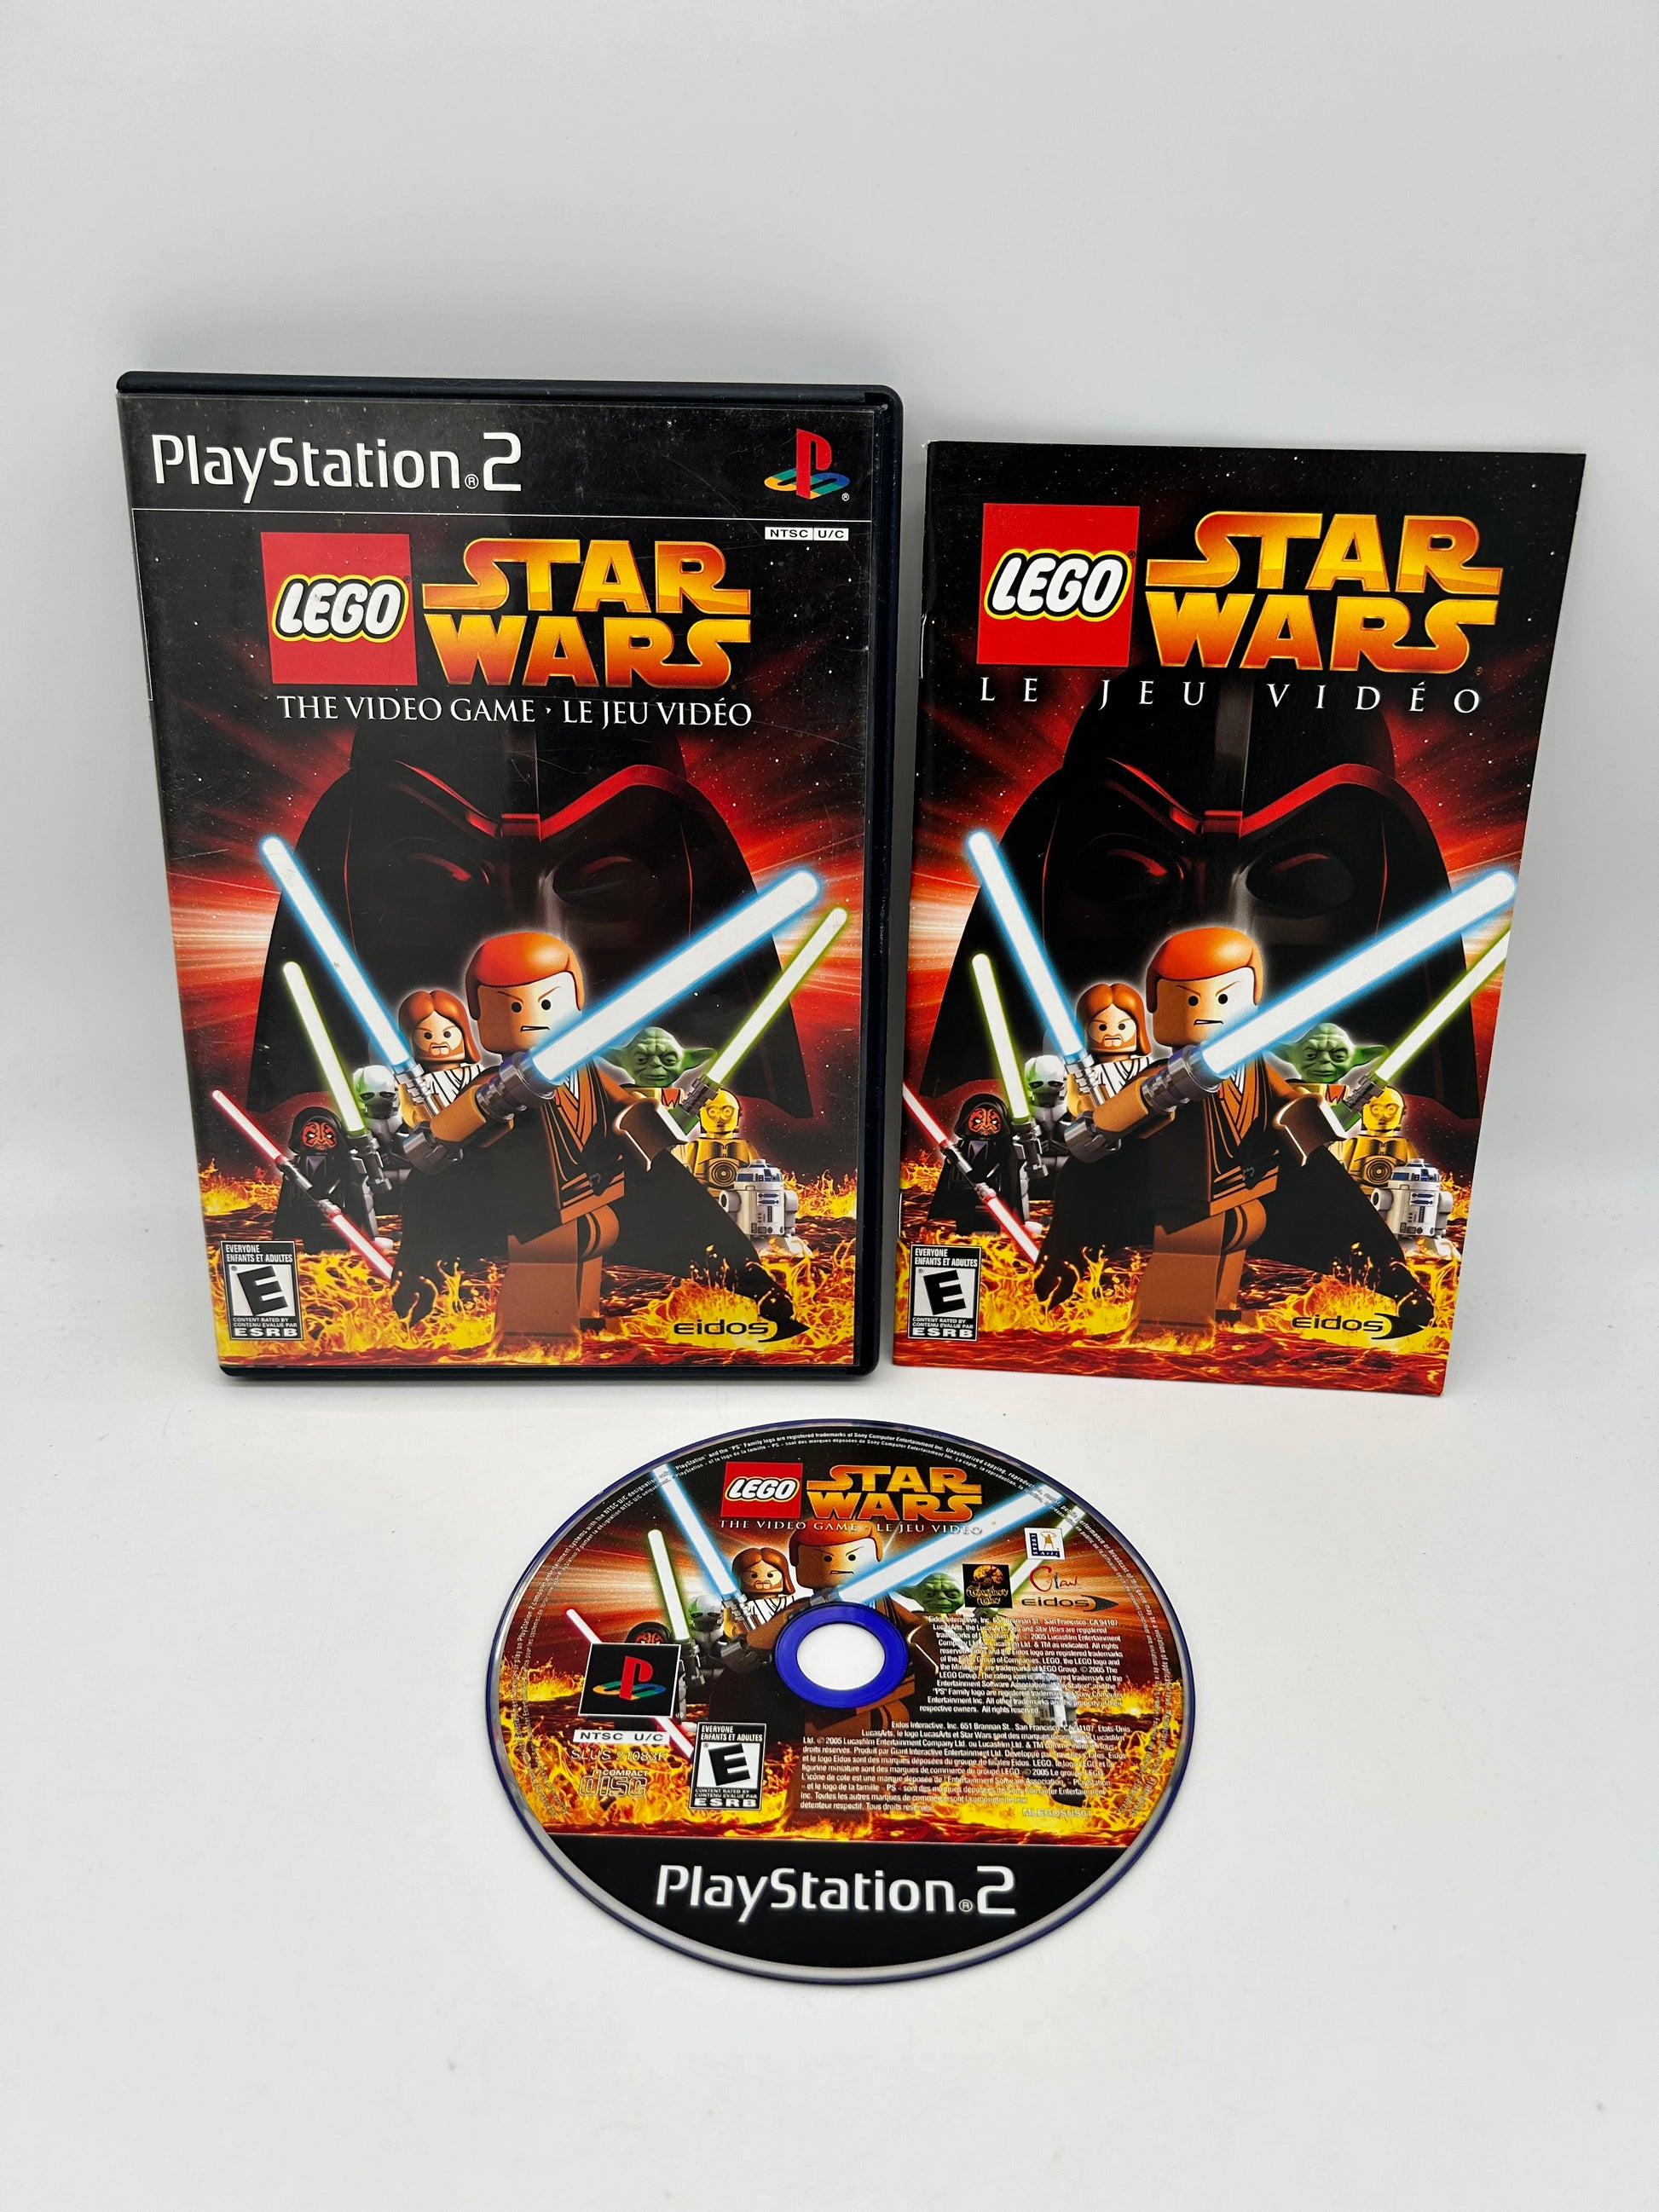 PiXEL-RETRO.COM : SONY PLAYSTATION 2 (PS2) COMPLET CIB BOX MANUAL GAME NTSC LEGO STAR WARS THE VIDEO GAME